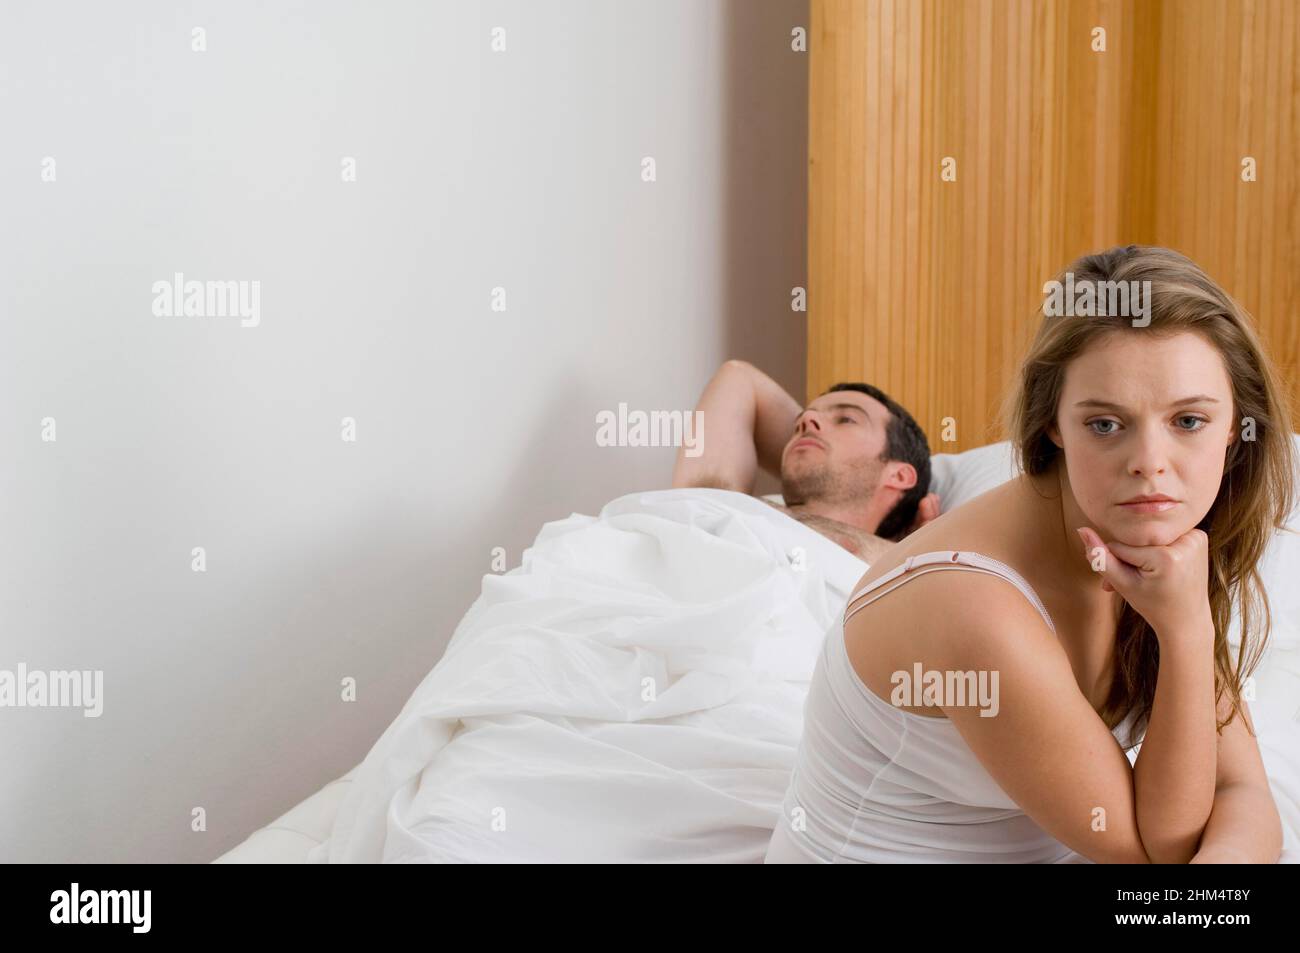 Close-Up Of Young Woman Sitting Beside A Young Man, Credit:Photoshot Creative / Stuart Cox / Avalon Stock Photo